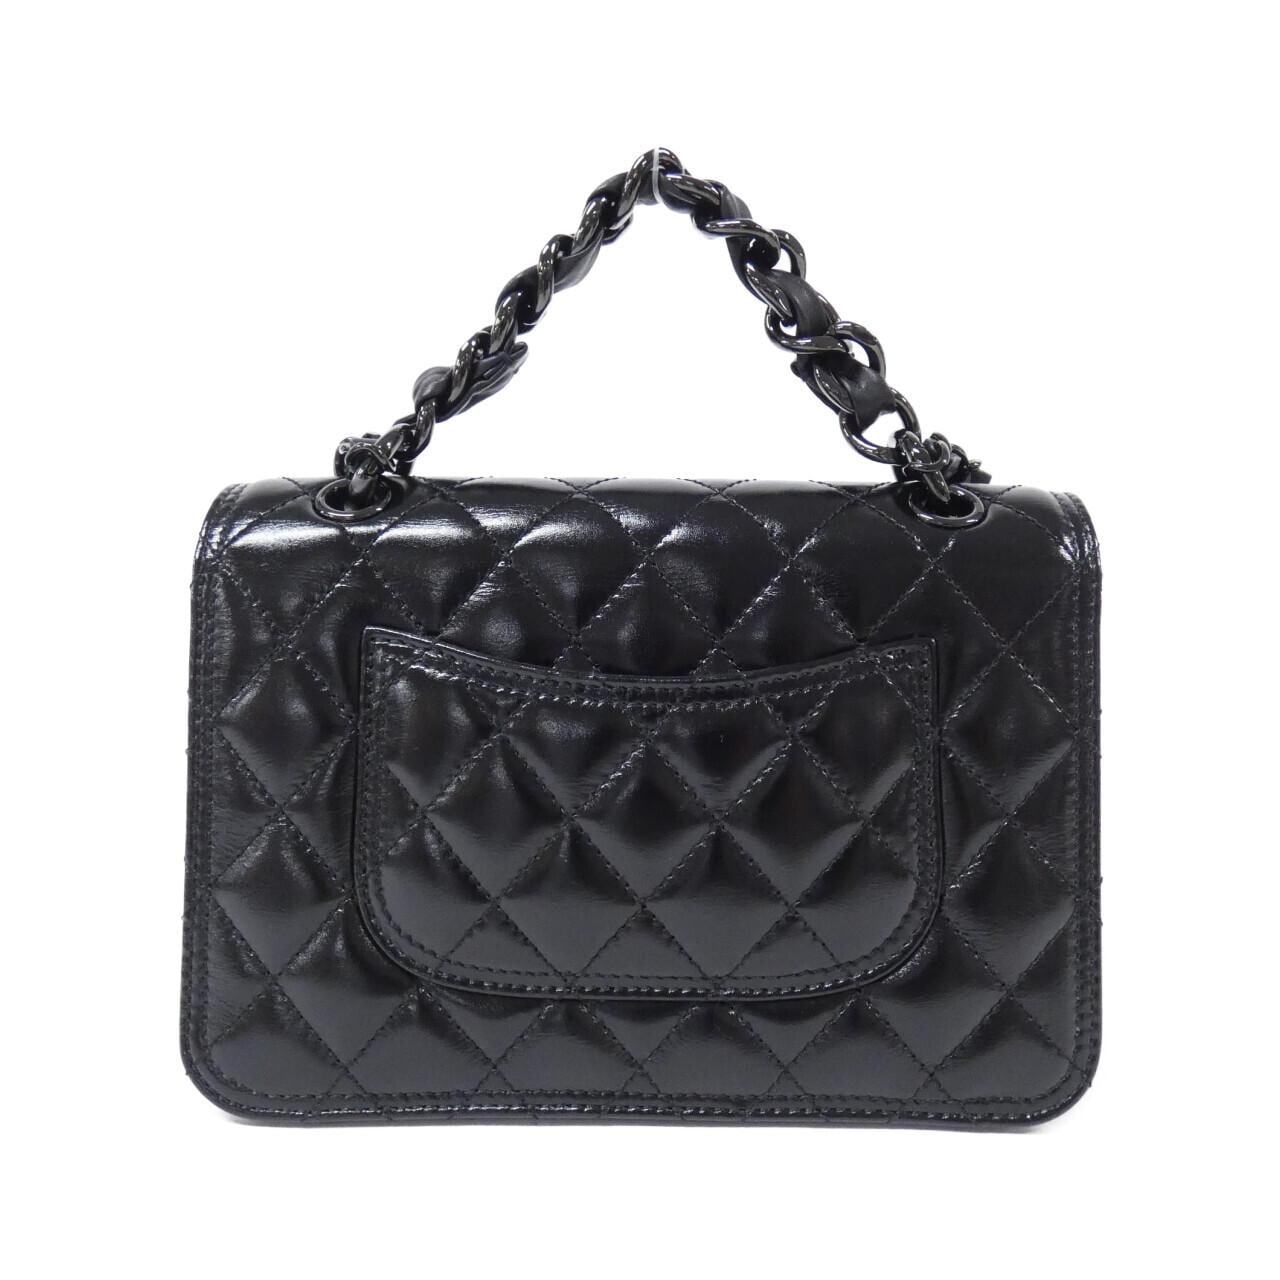 KOMEHYO|CHANEL AS4051 BAG|CHANEL|BRAND BAGS|OTHERS|[OFFICIAL 